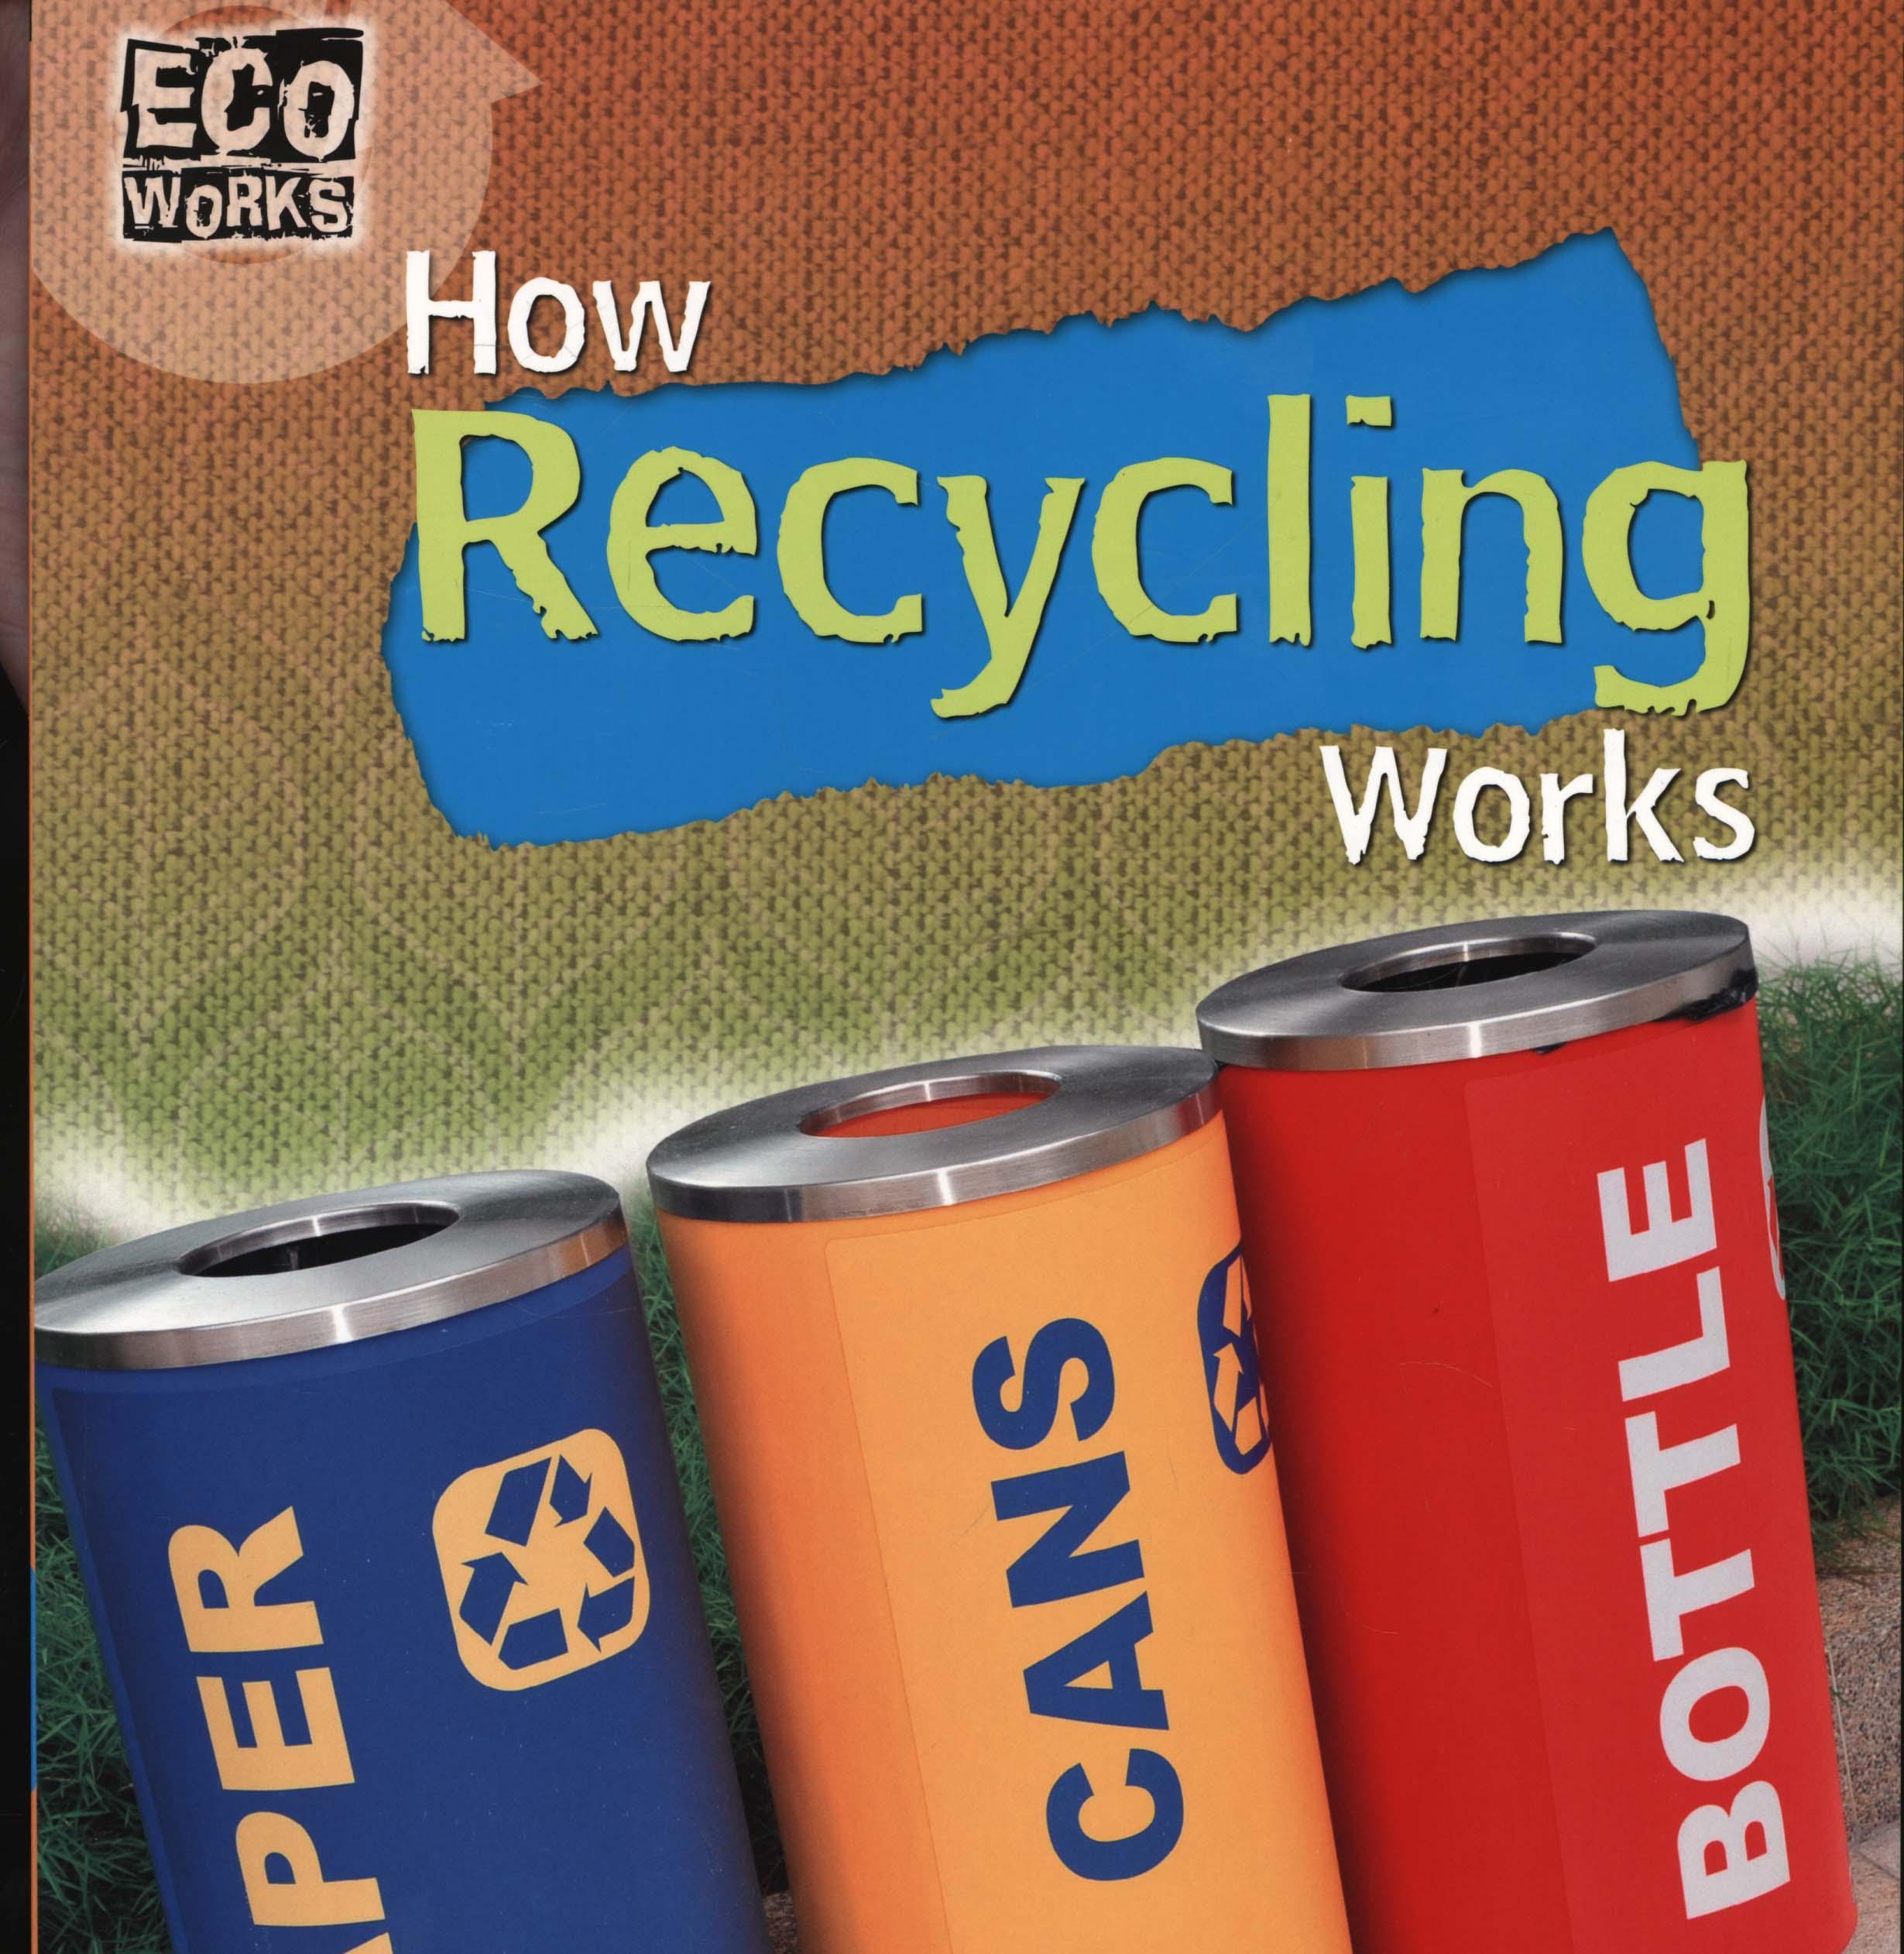 Eco Works: How Recycling Works